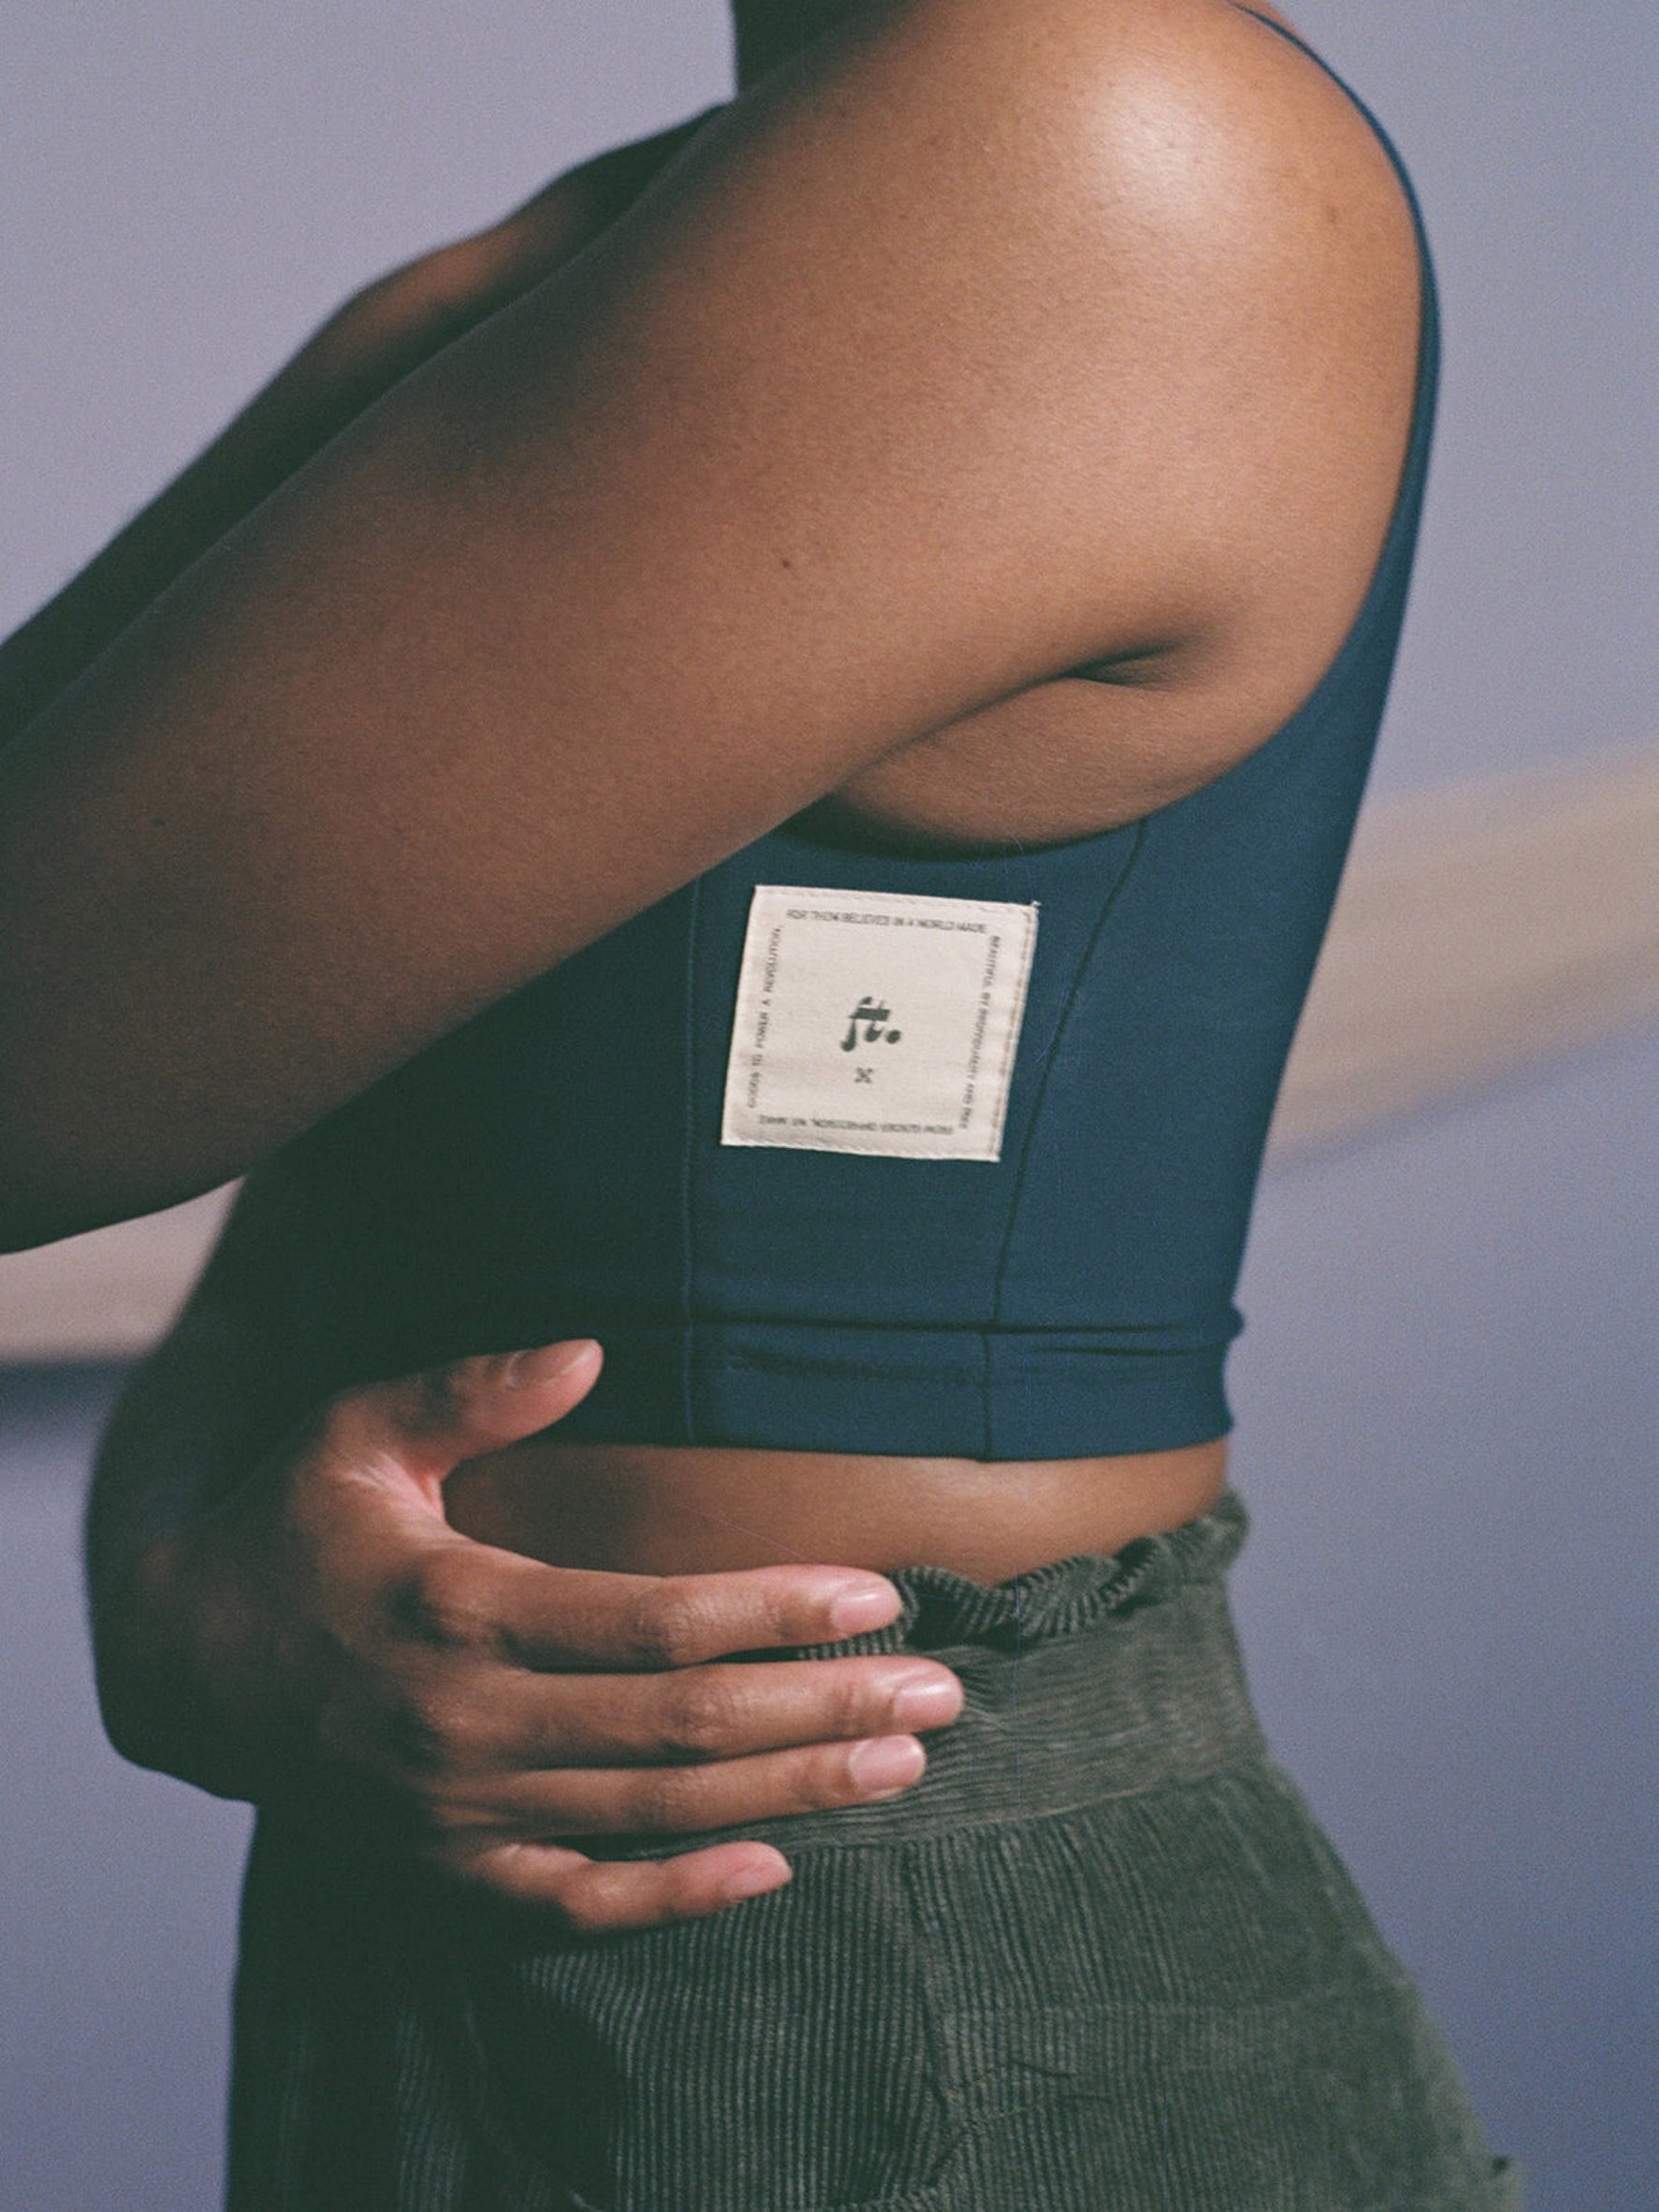 What is a chest binder? #binder #nonbinary #queer #transgender